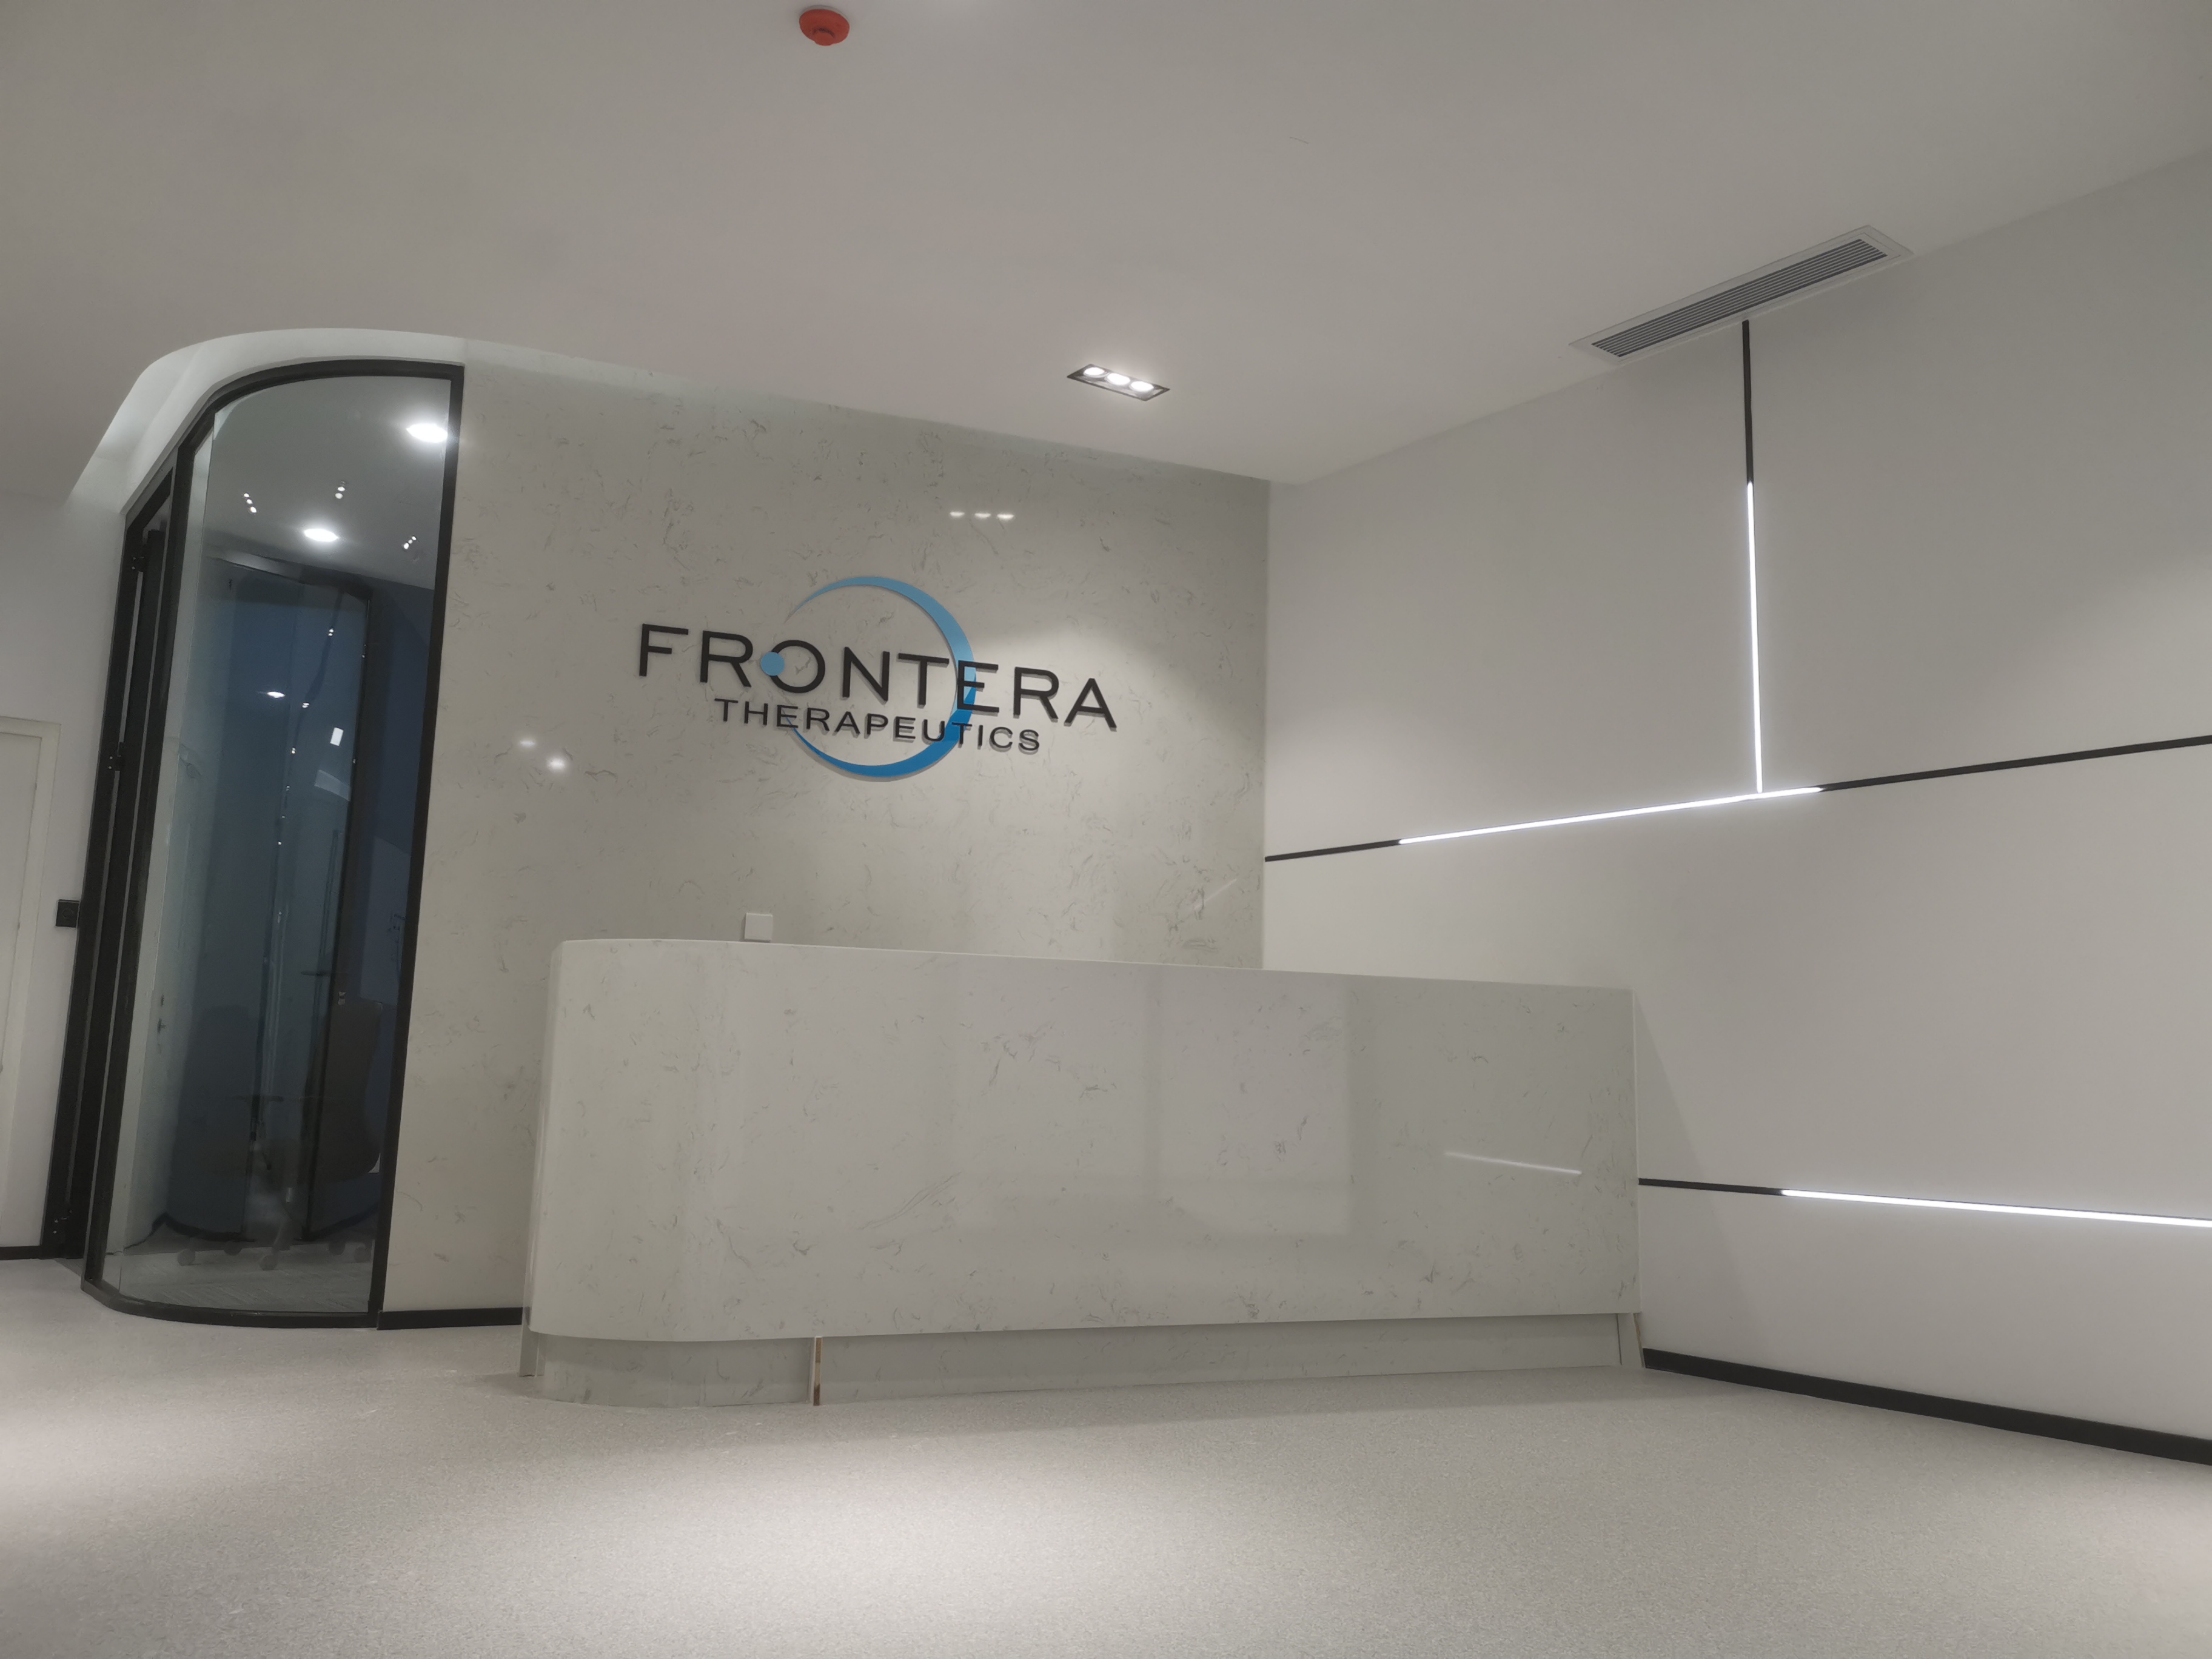 Frontera's manufacturing site is officially launched